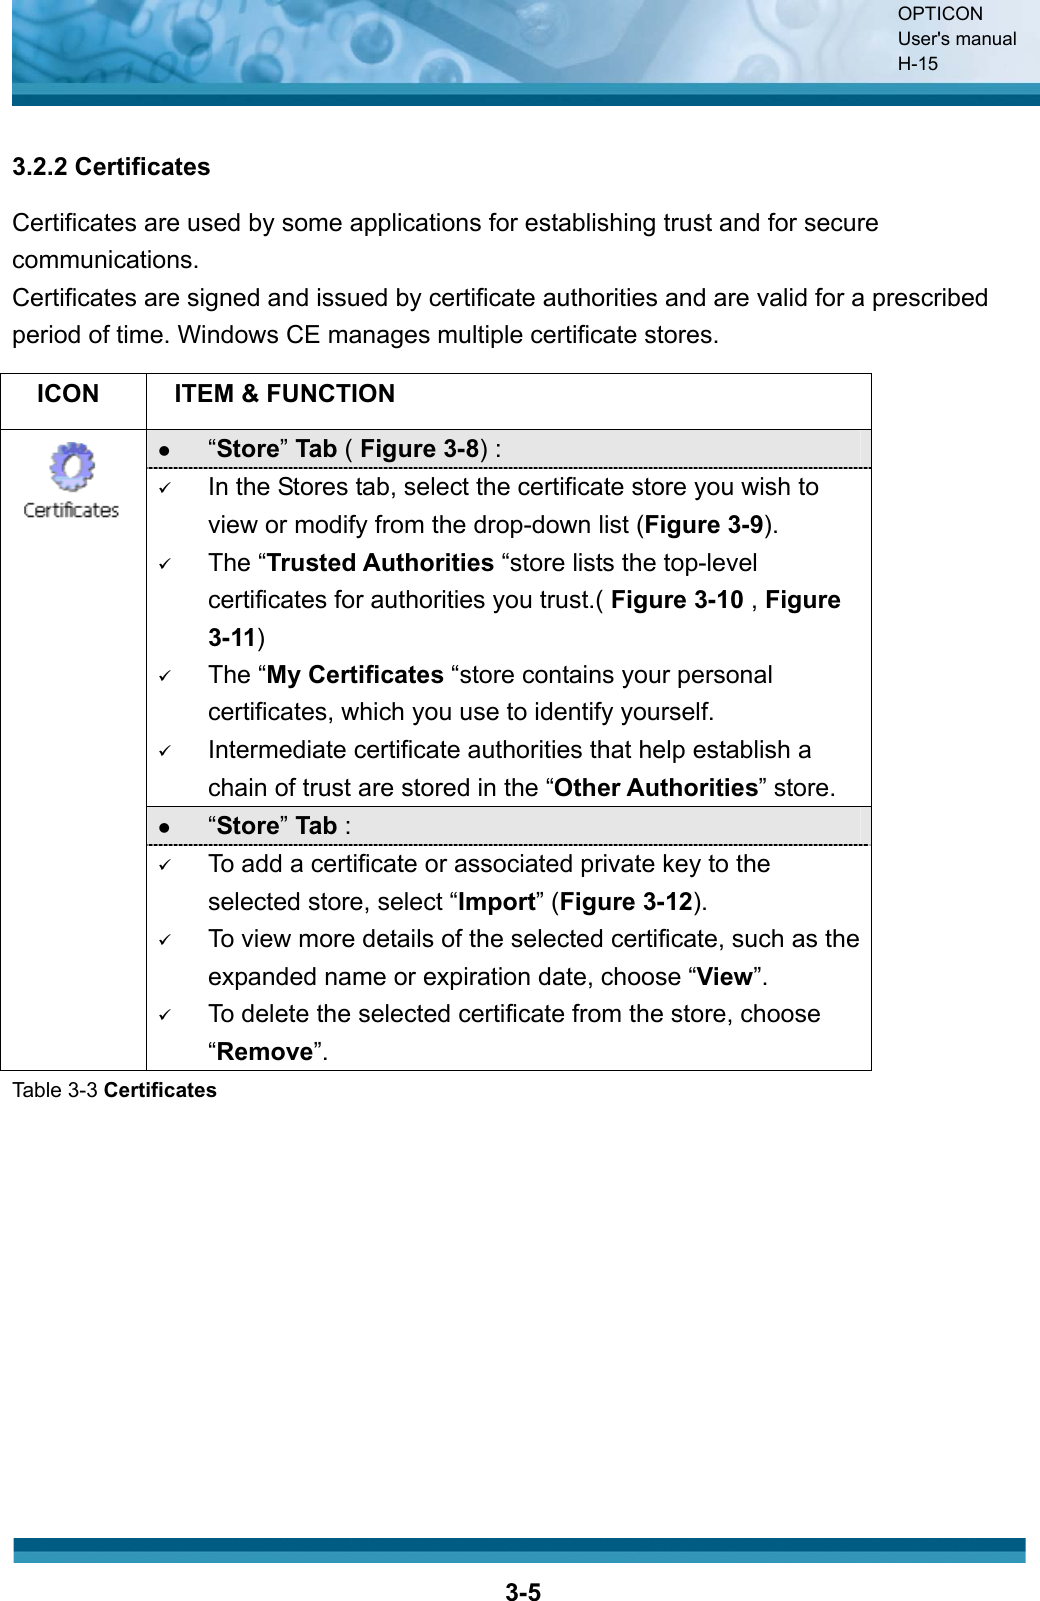 OPTICON User&apos;s manual H-153-53.2.2 Certificates Certificates are used by some applications for establishing trust and for secure communications.Certificates are signed and issued by certificate authorities and are valid for a prescribed period of time. Windows CE manages multiple certificate stores. ICON ITEM &amp; FUNCTION z“Store”Tab ( Figure 3-8) : 9In the Stores tab, select the certificate store you wish to view or modify from the drop-down list (Figure 3-9).9The “Trusted Authorities “store lists the top-level certificates for authorities you trust.( Figure 3-10 ,Figure3-11)9The “My Certificates “store contains your personal certificates, which you use to identify yourself. 9Intermediate certificate authorities that help establish a chain of trust are stored in the “Other Authorities” store.z“Store”Tab : 9To add a certificate or associated private key to the selected store, select “Import” (Figure 3-12).9To view more details of the selected certificate, such as the expanded name or expiration date, choose “View”.9To delete the selected certificate from the store, choose “Remove”.Table 3-3 Certificates 